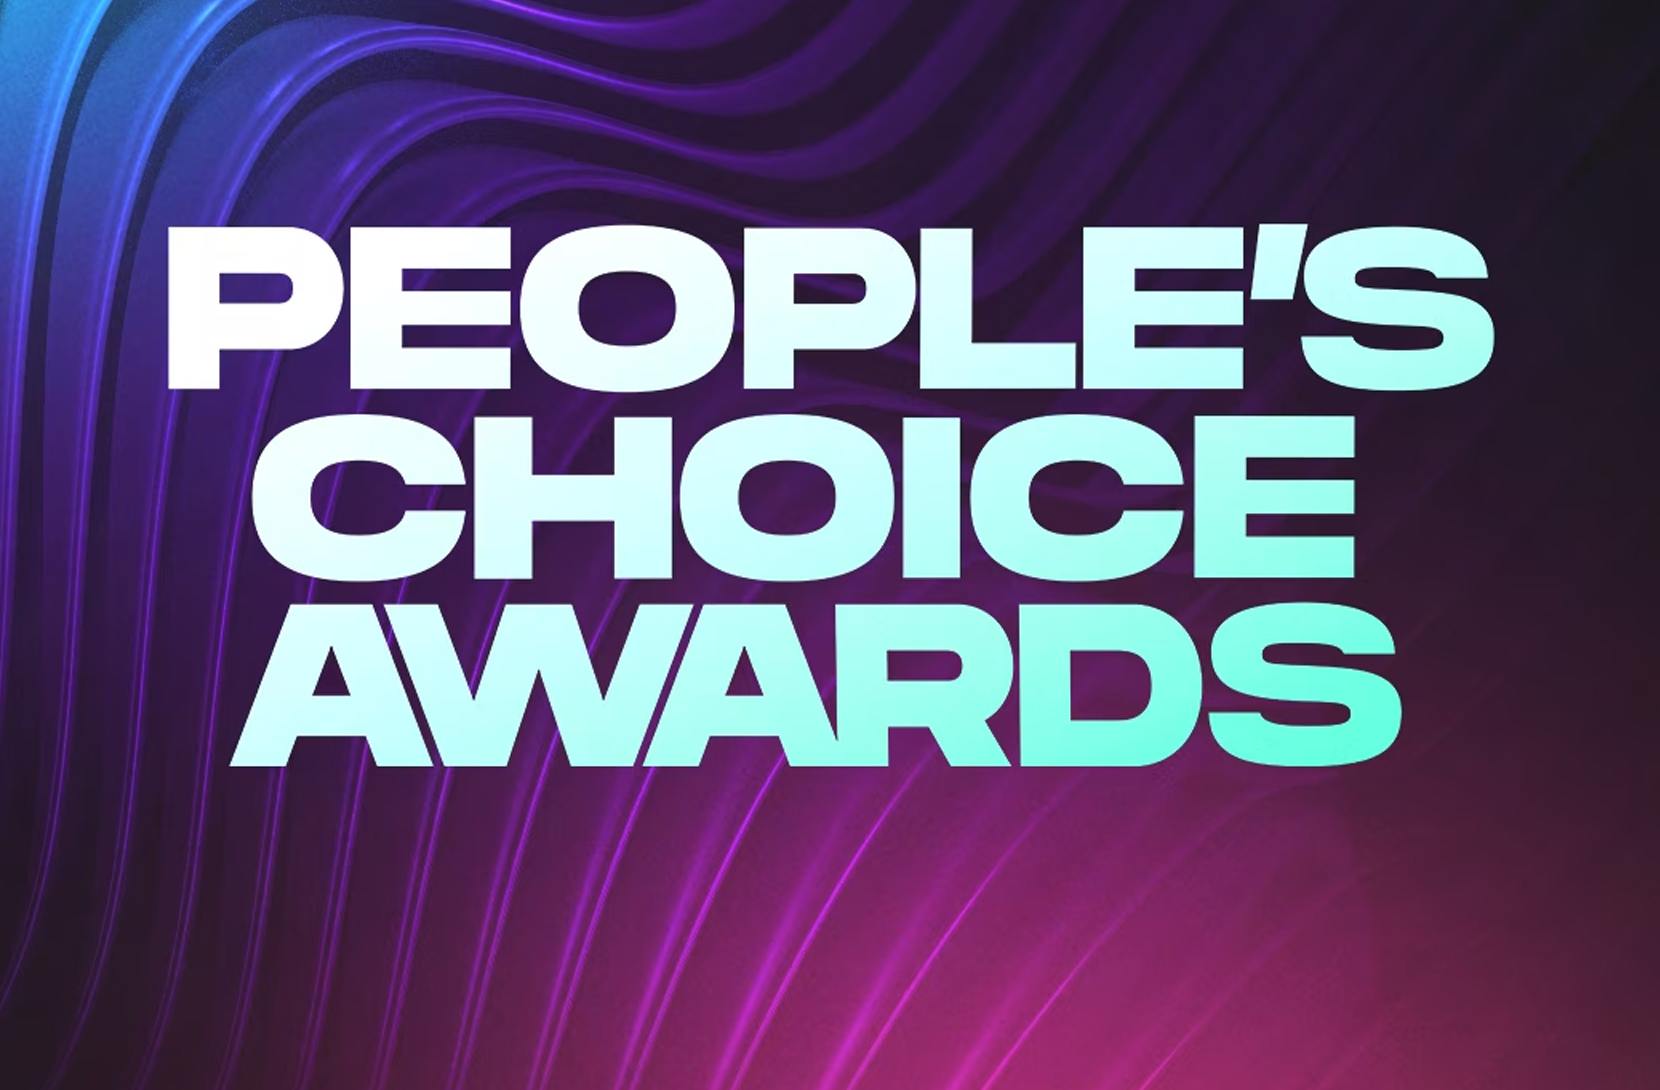 Kylie Minogue & Lainey Wilson to Perform at "People's Choice Awards" on February 18